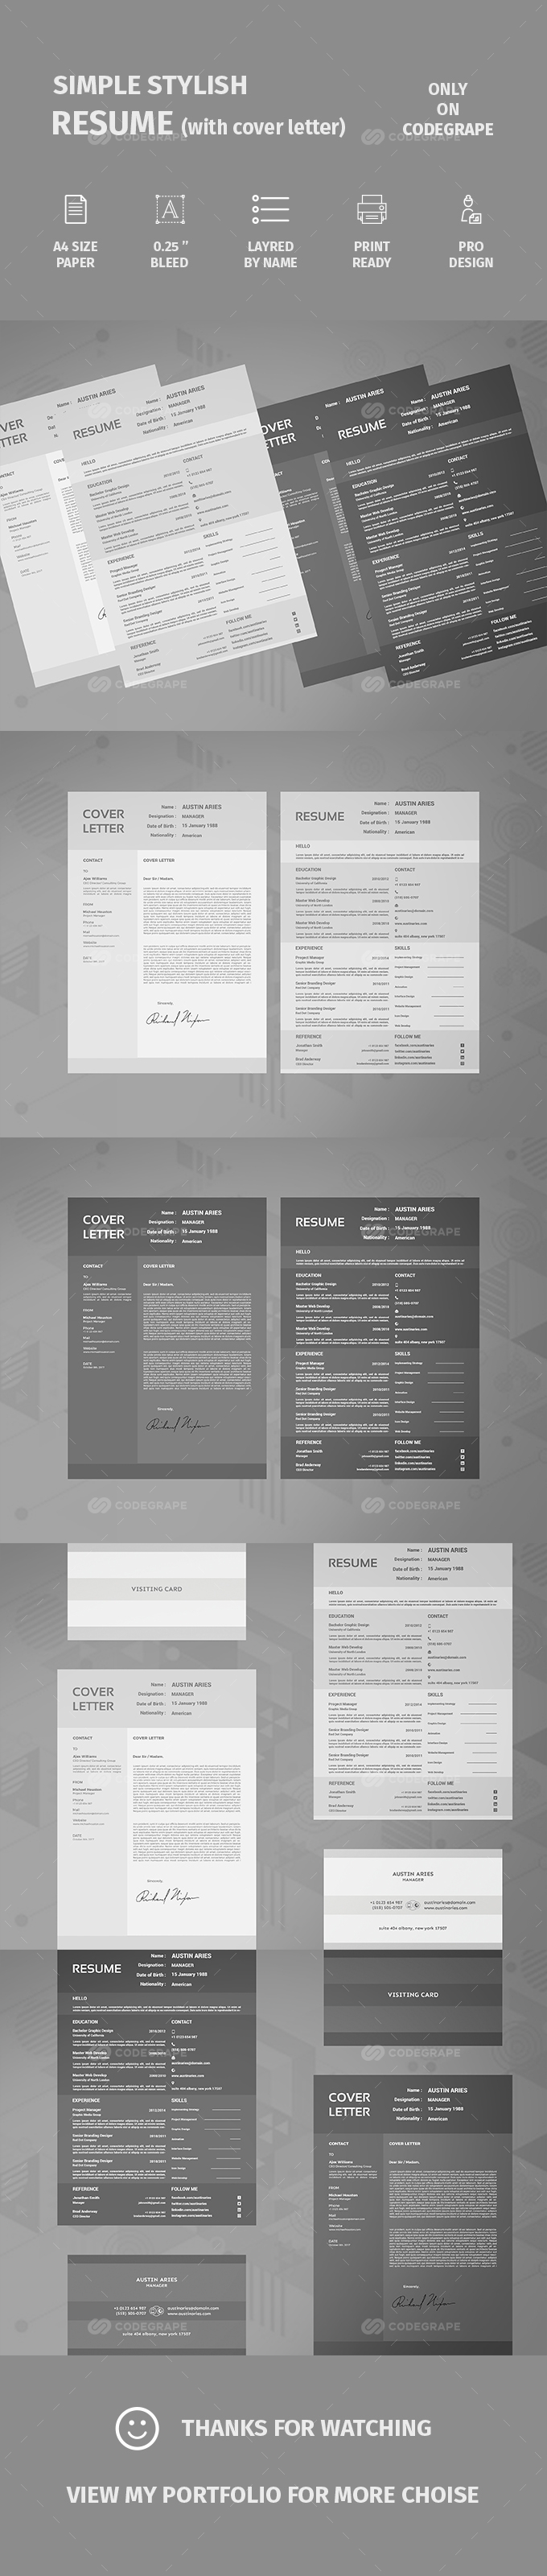 Simple Stylish Resume (with Cover Letter)